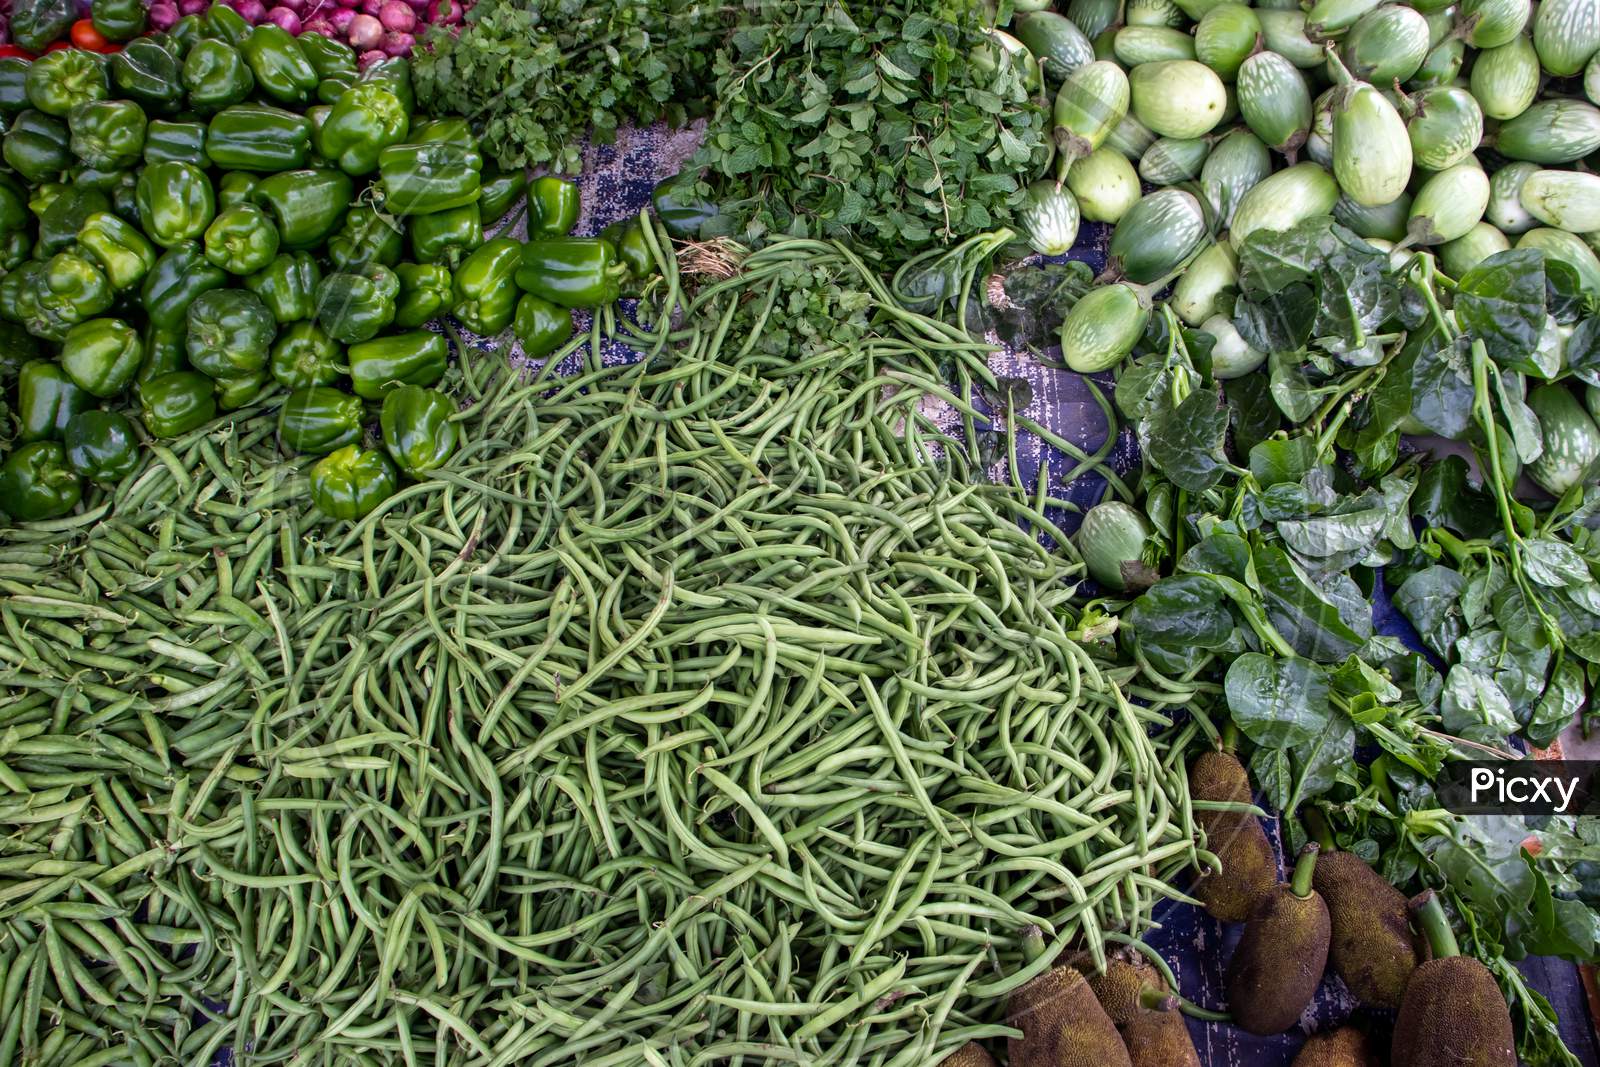 Various Raw Vegetables In An Indian Vegetable Market For Selling